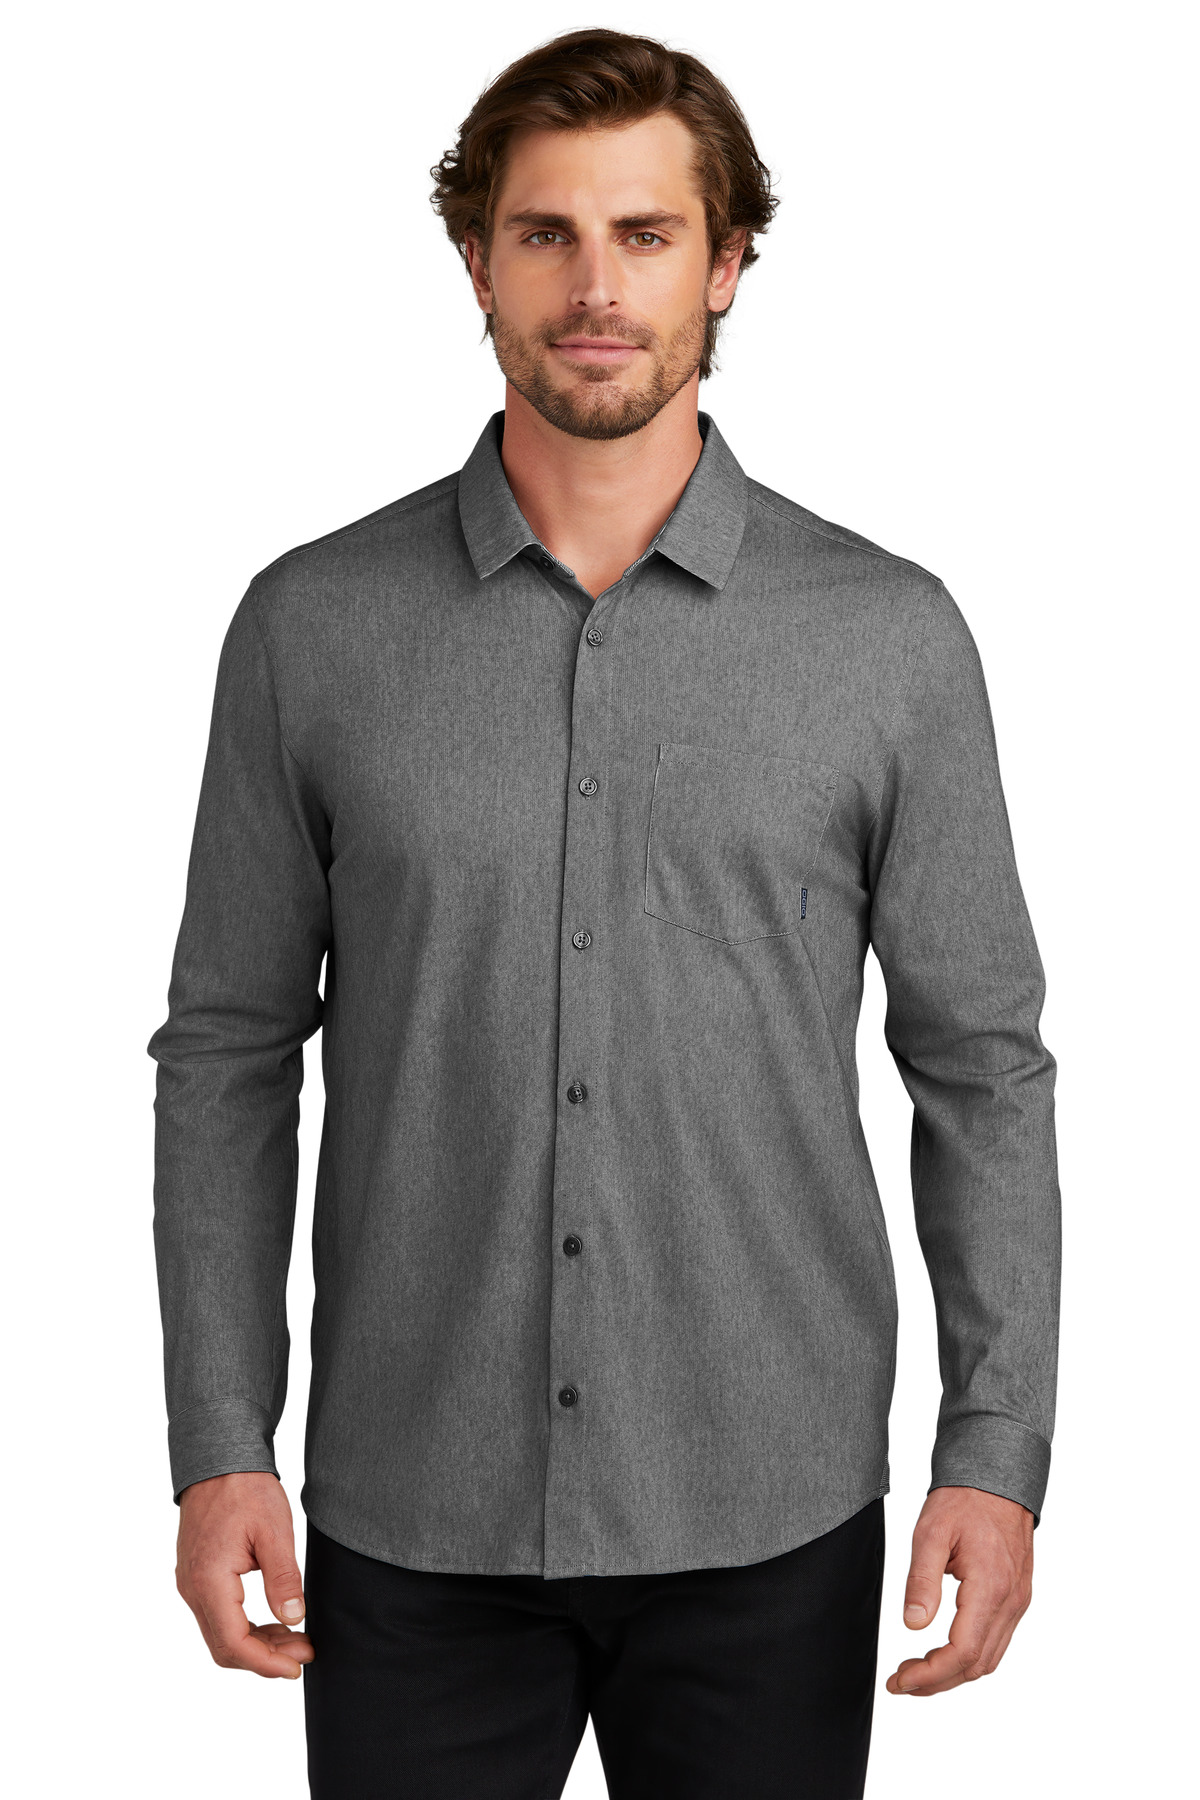 OGIO Extend Long Sleeve Button-Up-